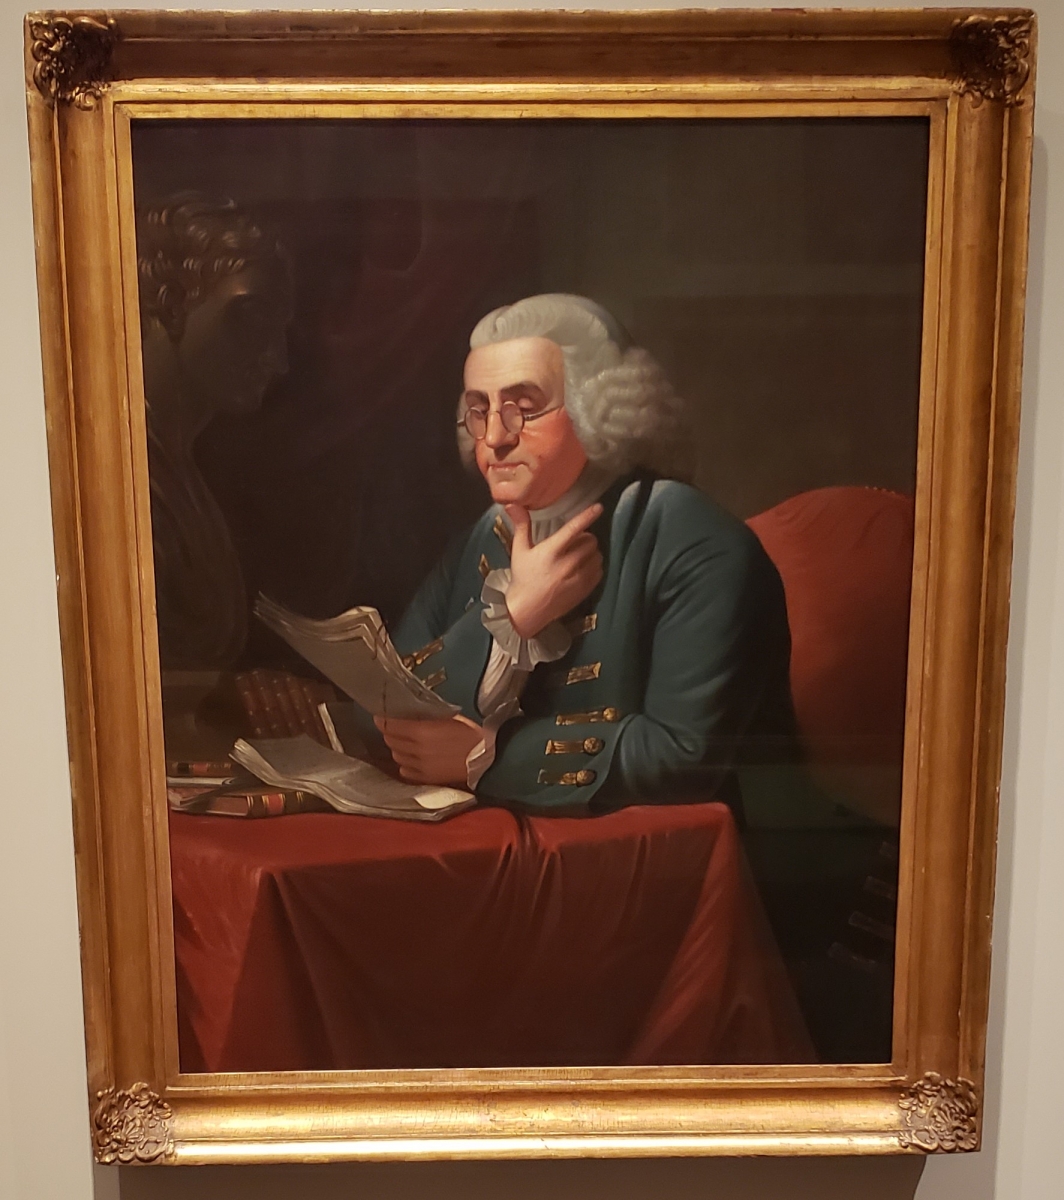 Portrait of Benjamin Franklin as it hangs in the Second Bank of the United States Portrait Gallery in Philadelphia